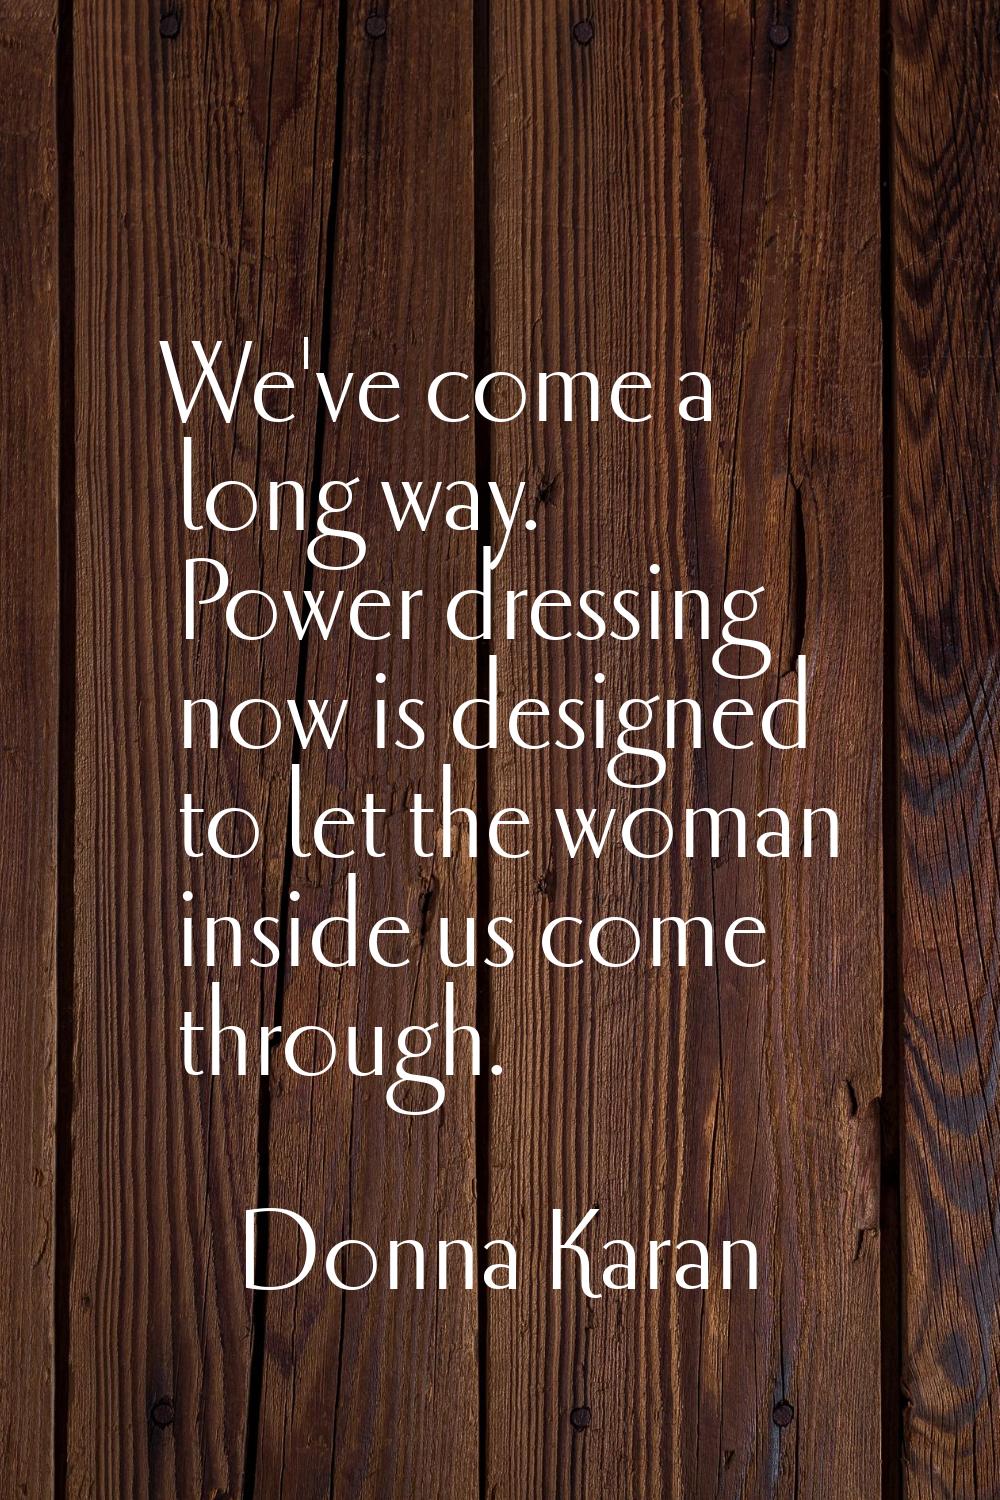 We've come a long way. Power dressing now is designed to let the woman inside us come through.